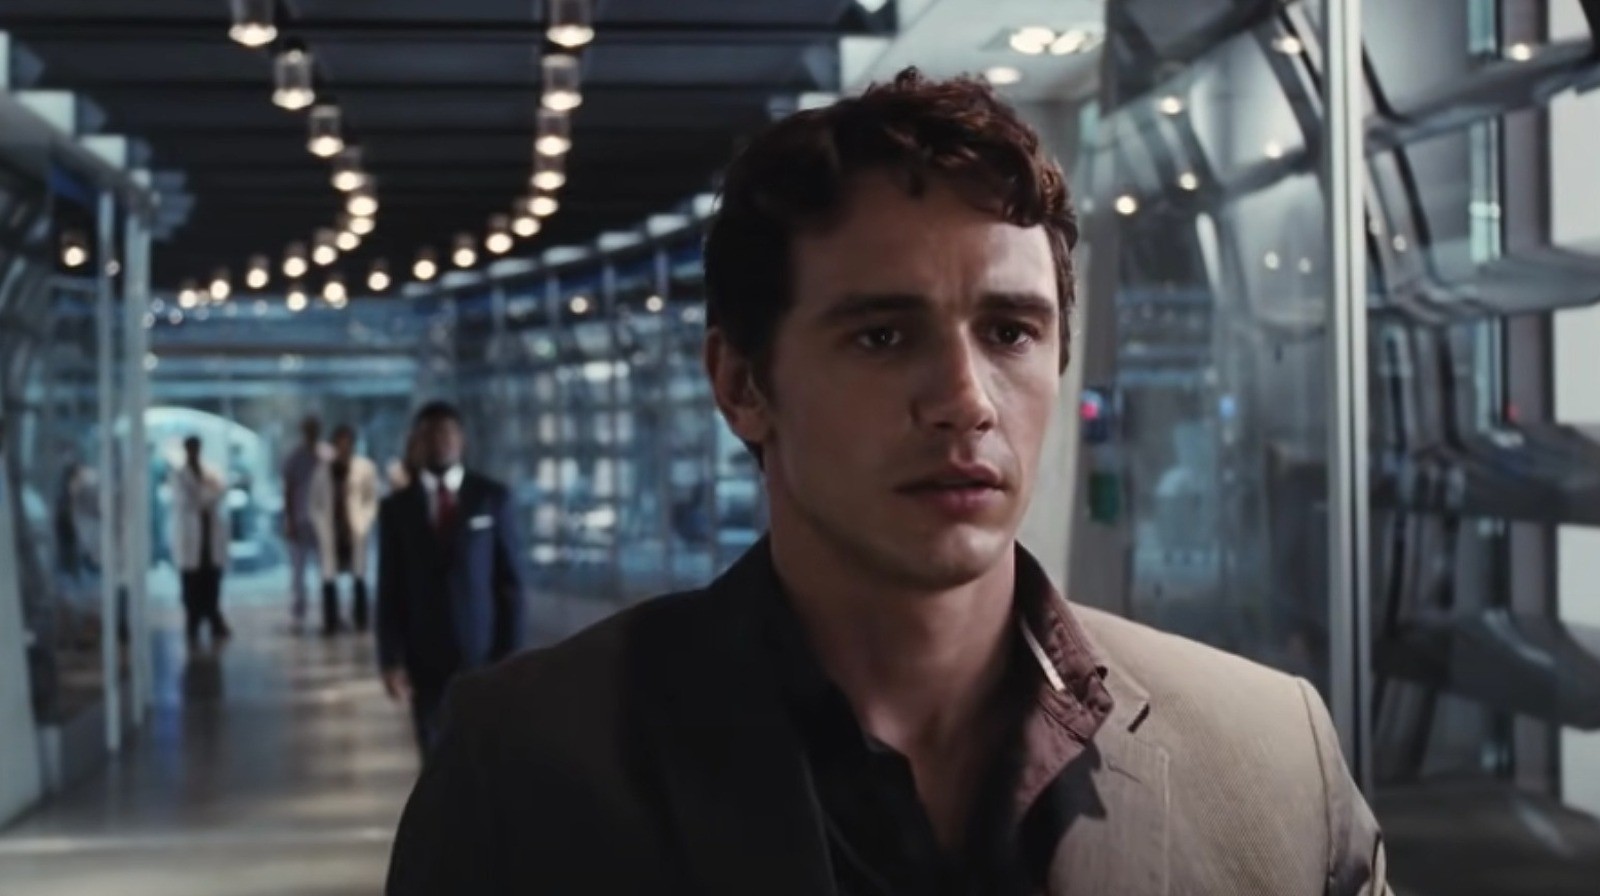 James Franco's ending may be the worst criticism against the otherwise acclaimed Rise of the Planet of the Apes